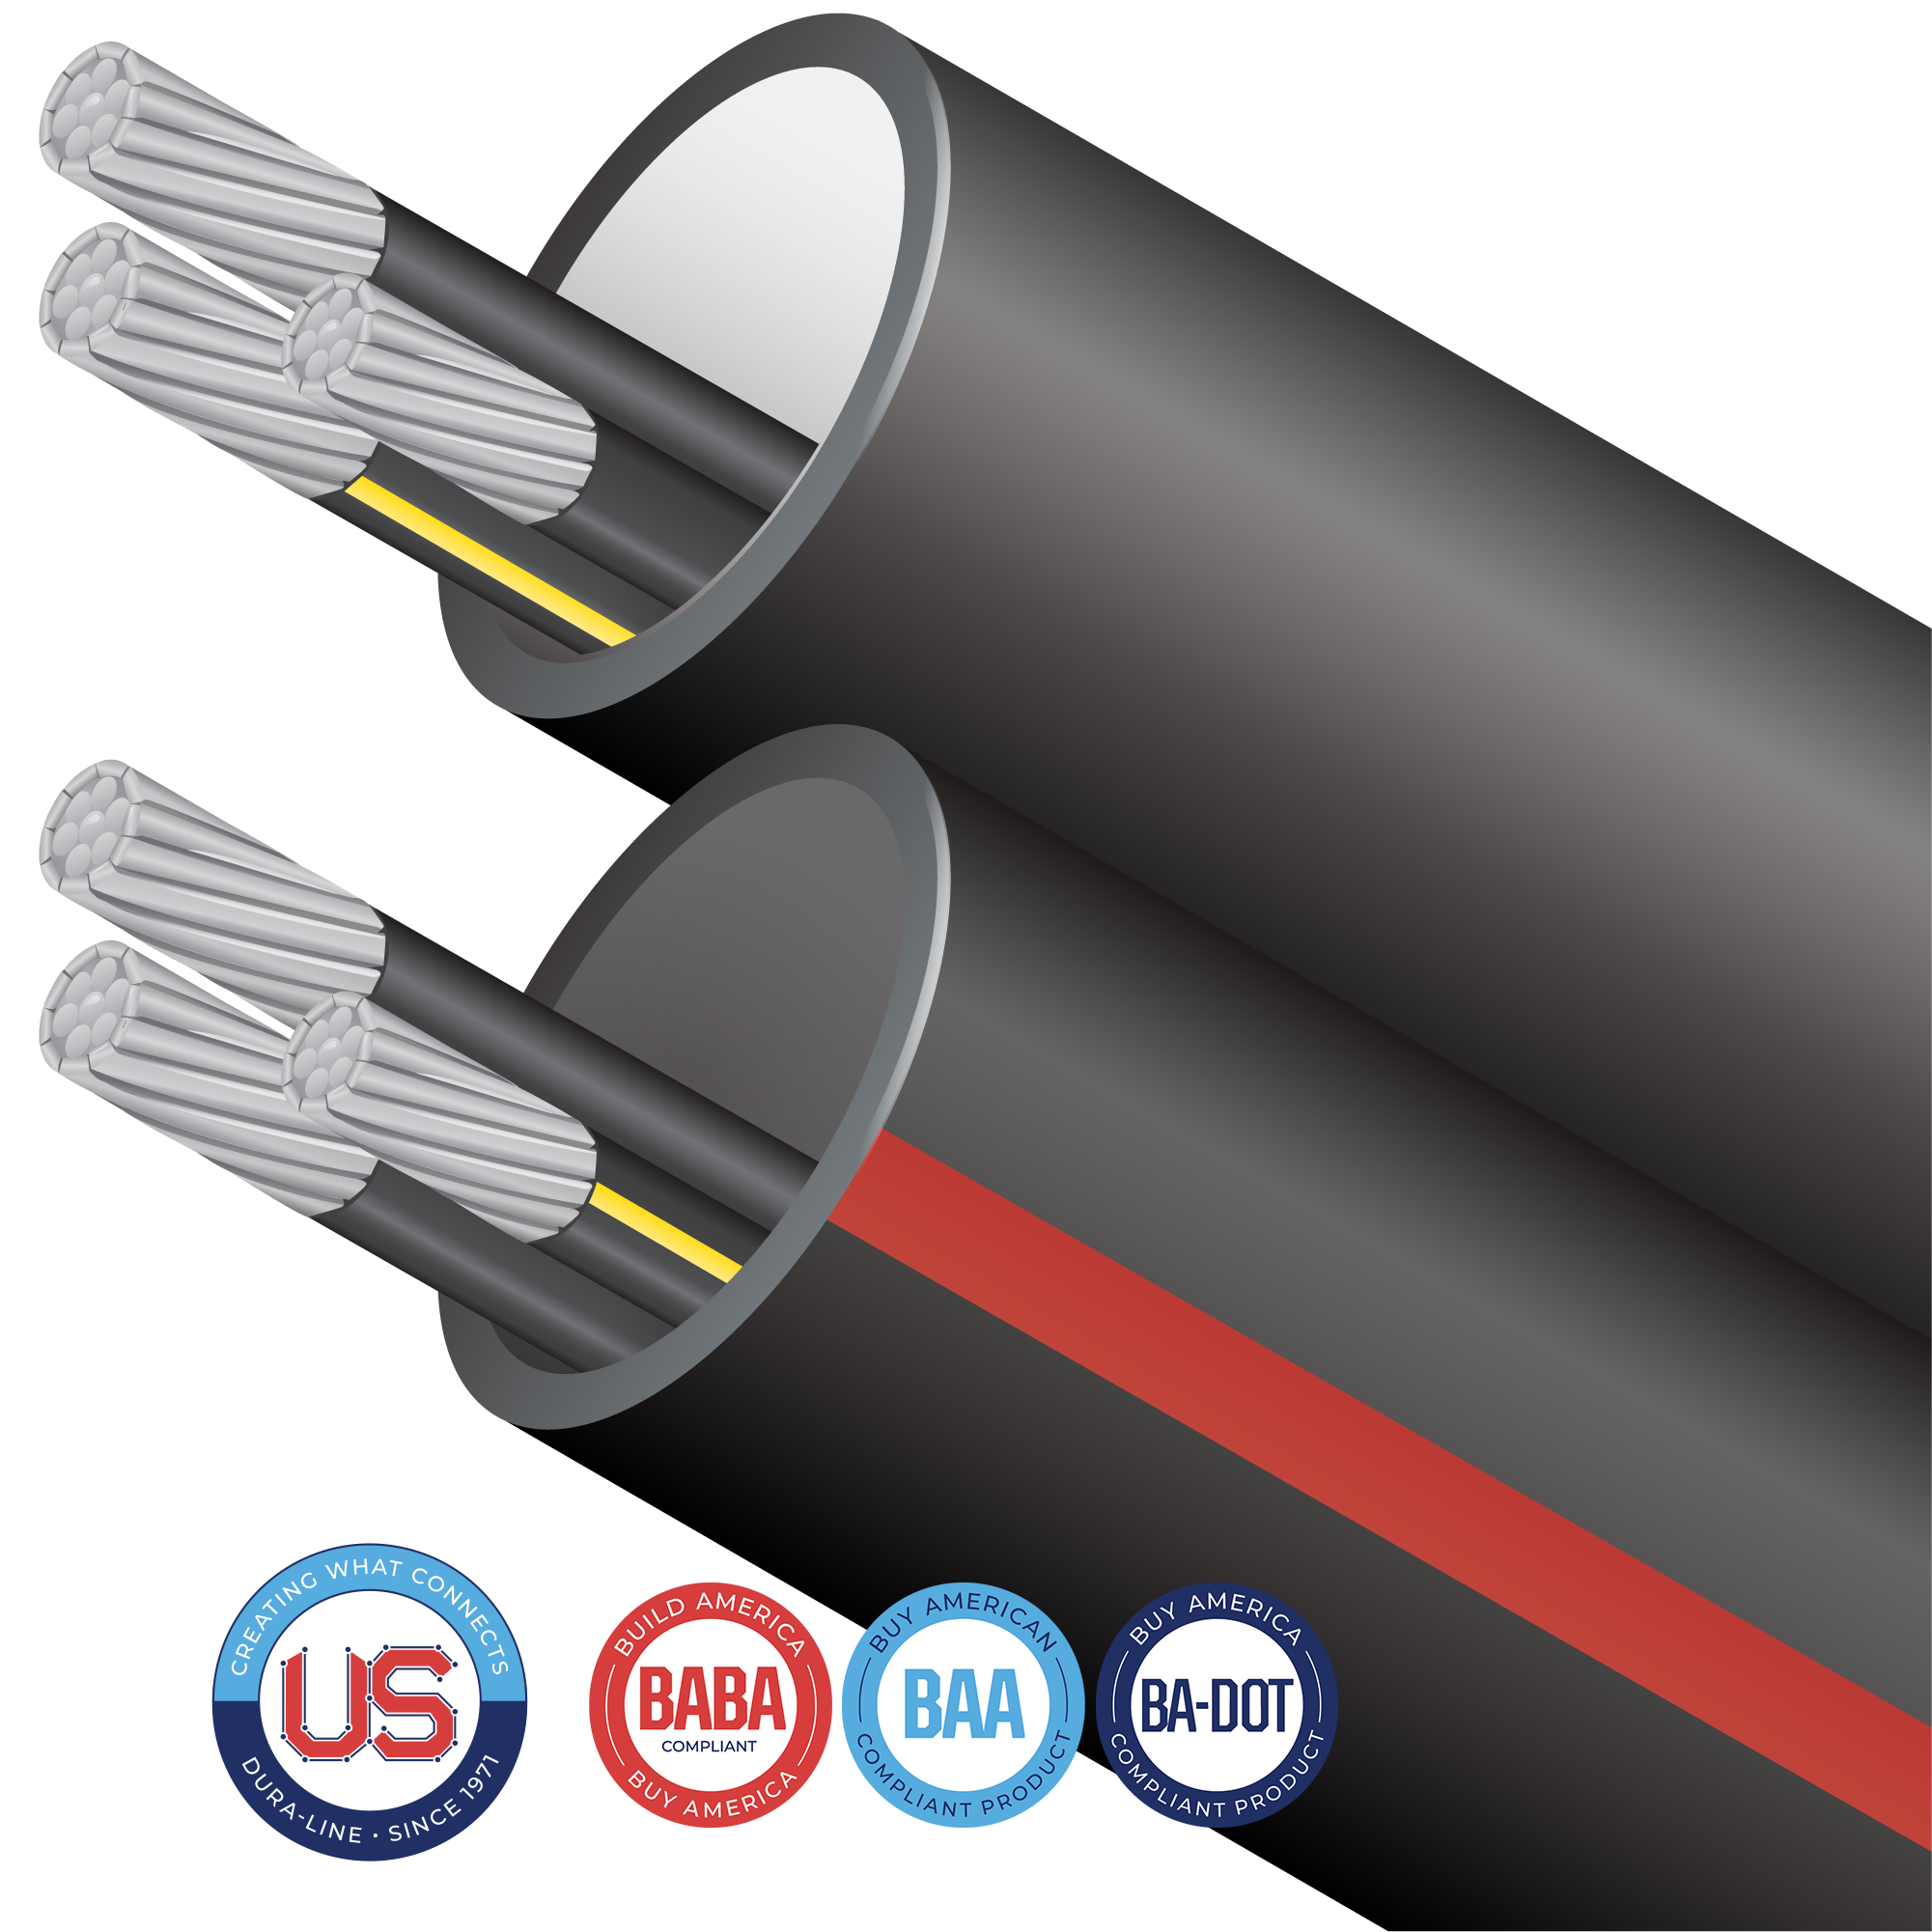 With Cable-in-Conduit (CIC), your choice of cable is factory pre-installed allowing for one-step placement of conduit and cable. We offer an extensive portfolio of US-made conduit products and accessories that conform with several domestic preference standards, including Buy America (BAA), Build America, Buy America (BABA), and DOT Buy American requirements. Any products including a locate wire or preinstalled cables, will need to be specifically evaluated. FIre Retardant Resins may also require additional evaluation to meet program guidelines. Please contact your Dura-Line representative for more information.